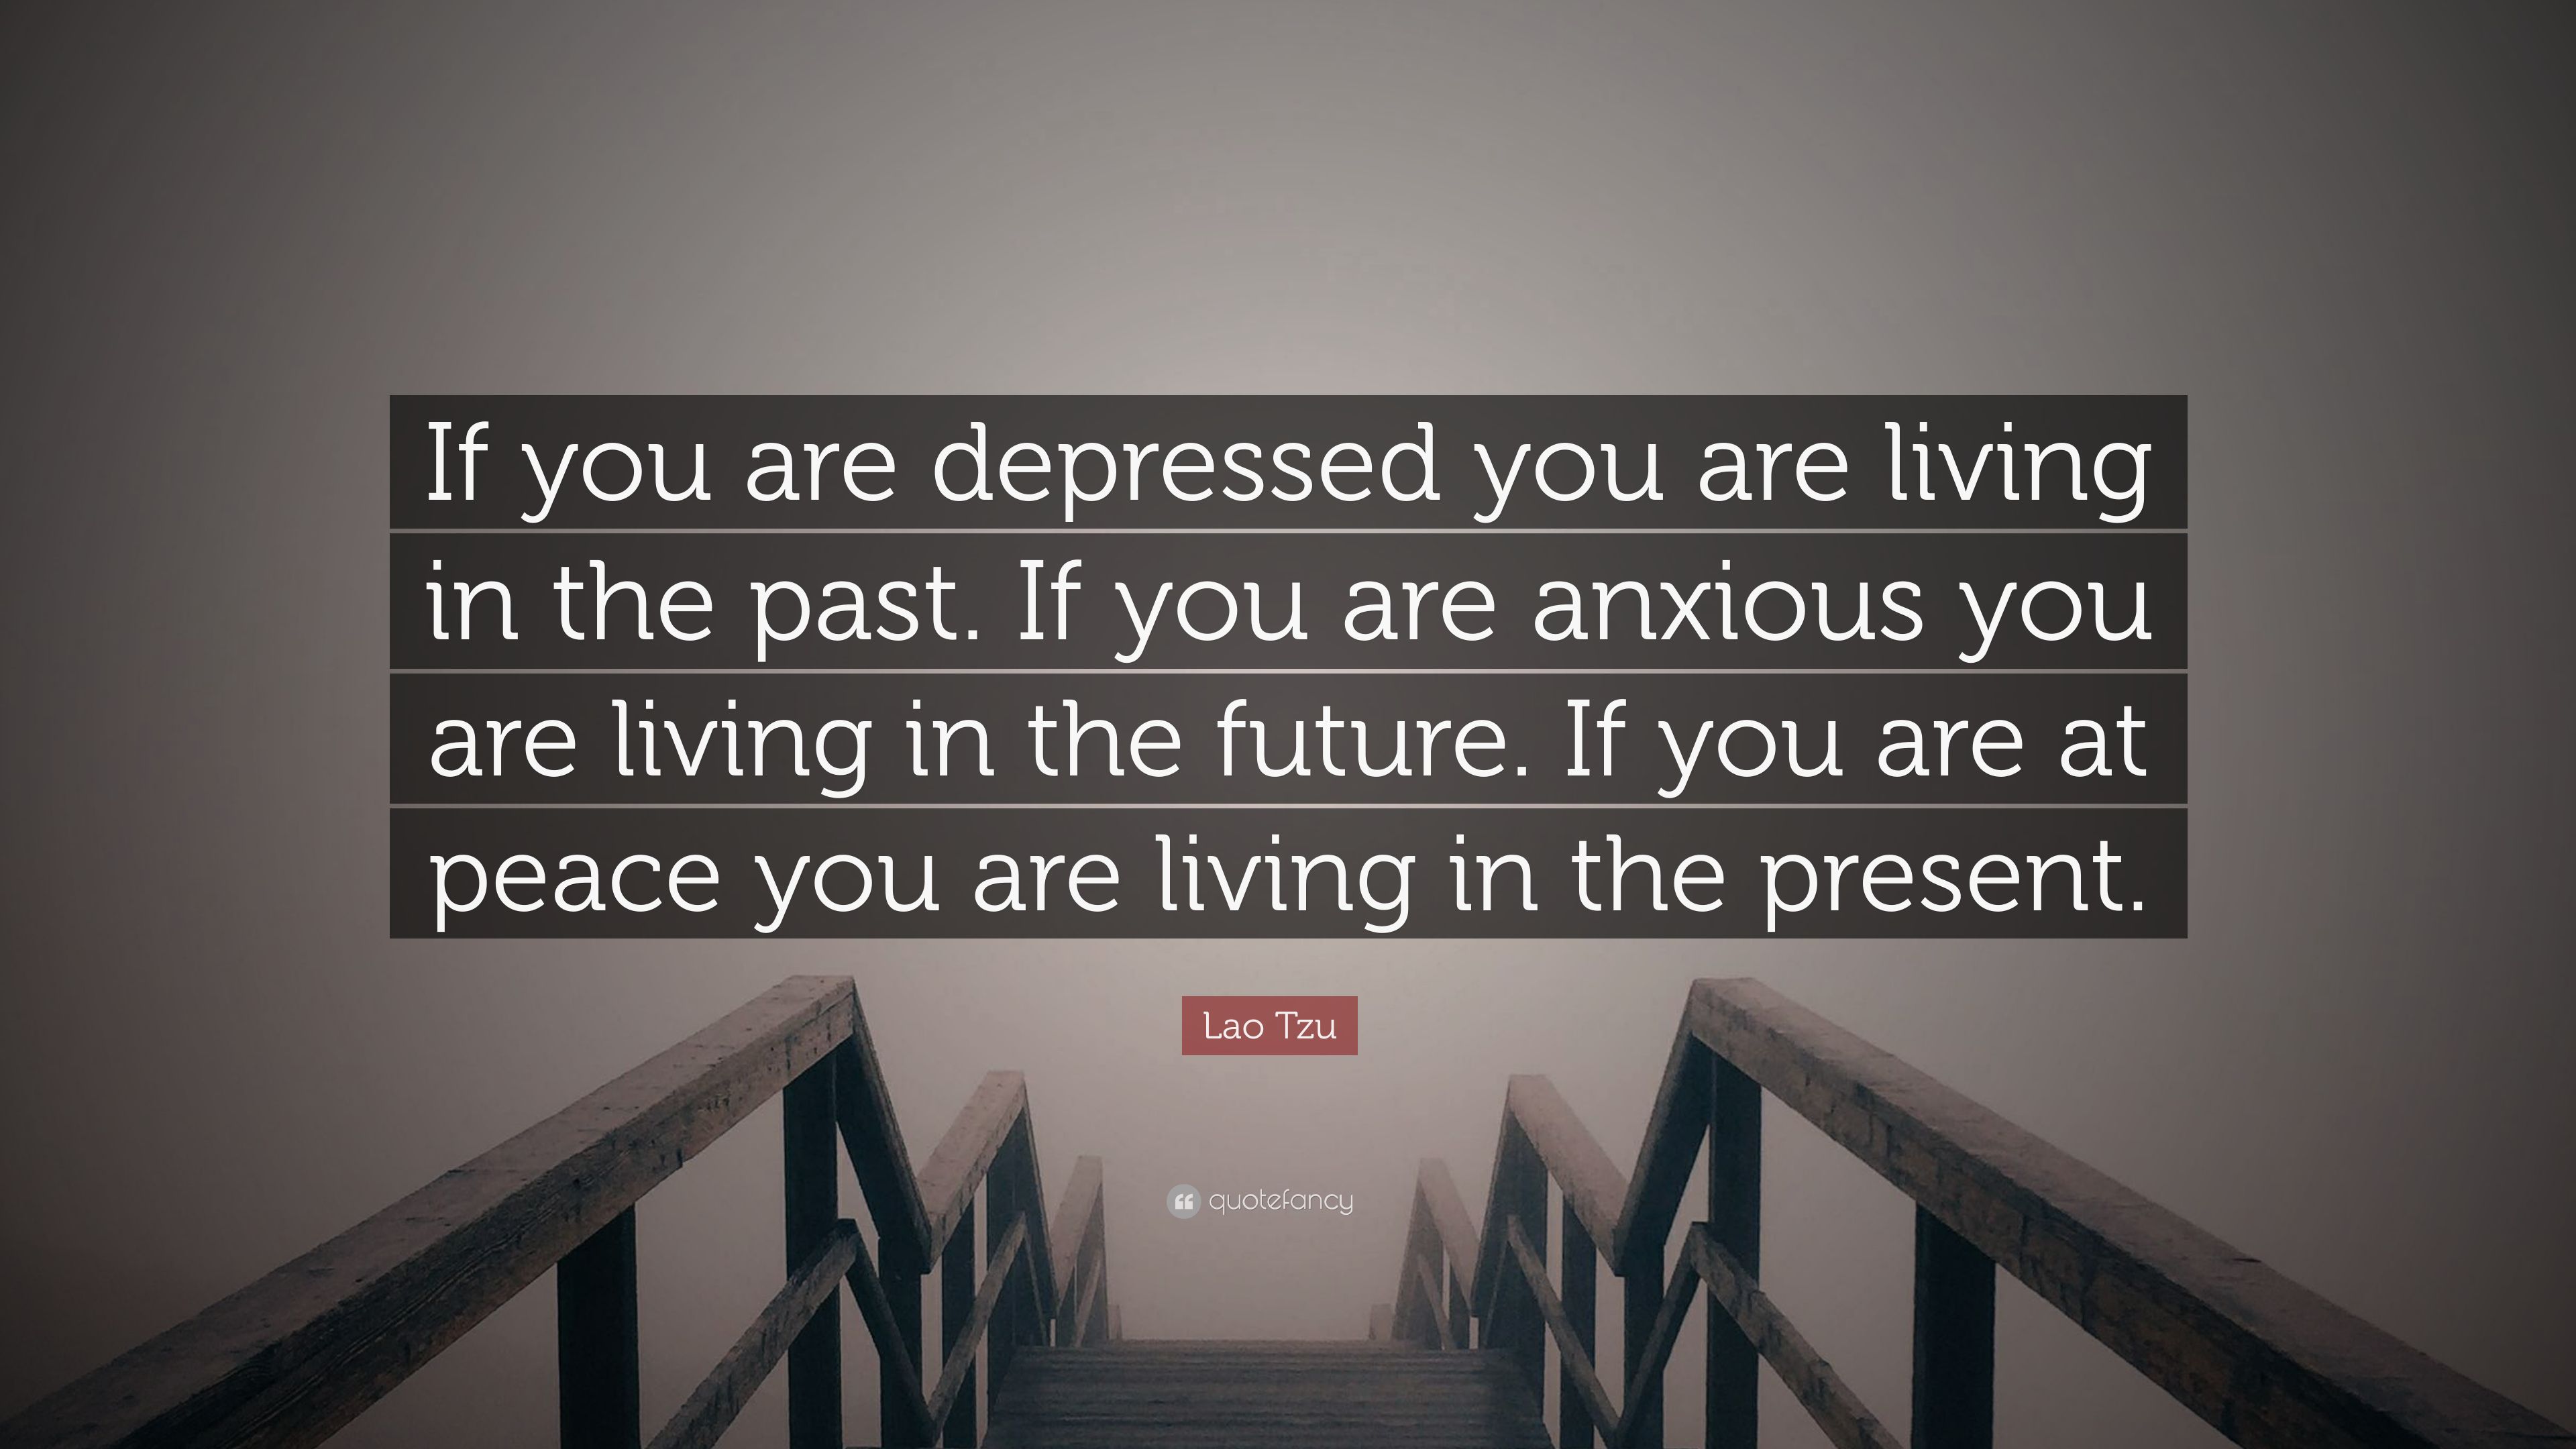 Lao Tzu Quote: “If you are depressed you are living in the past